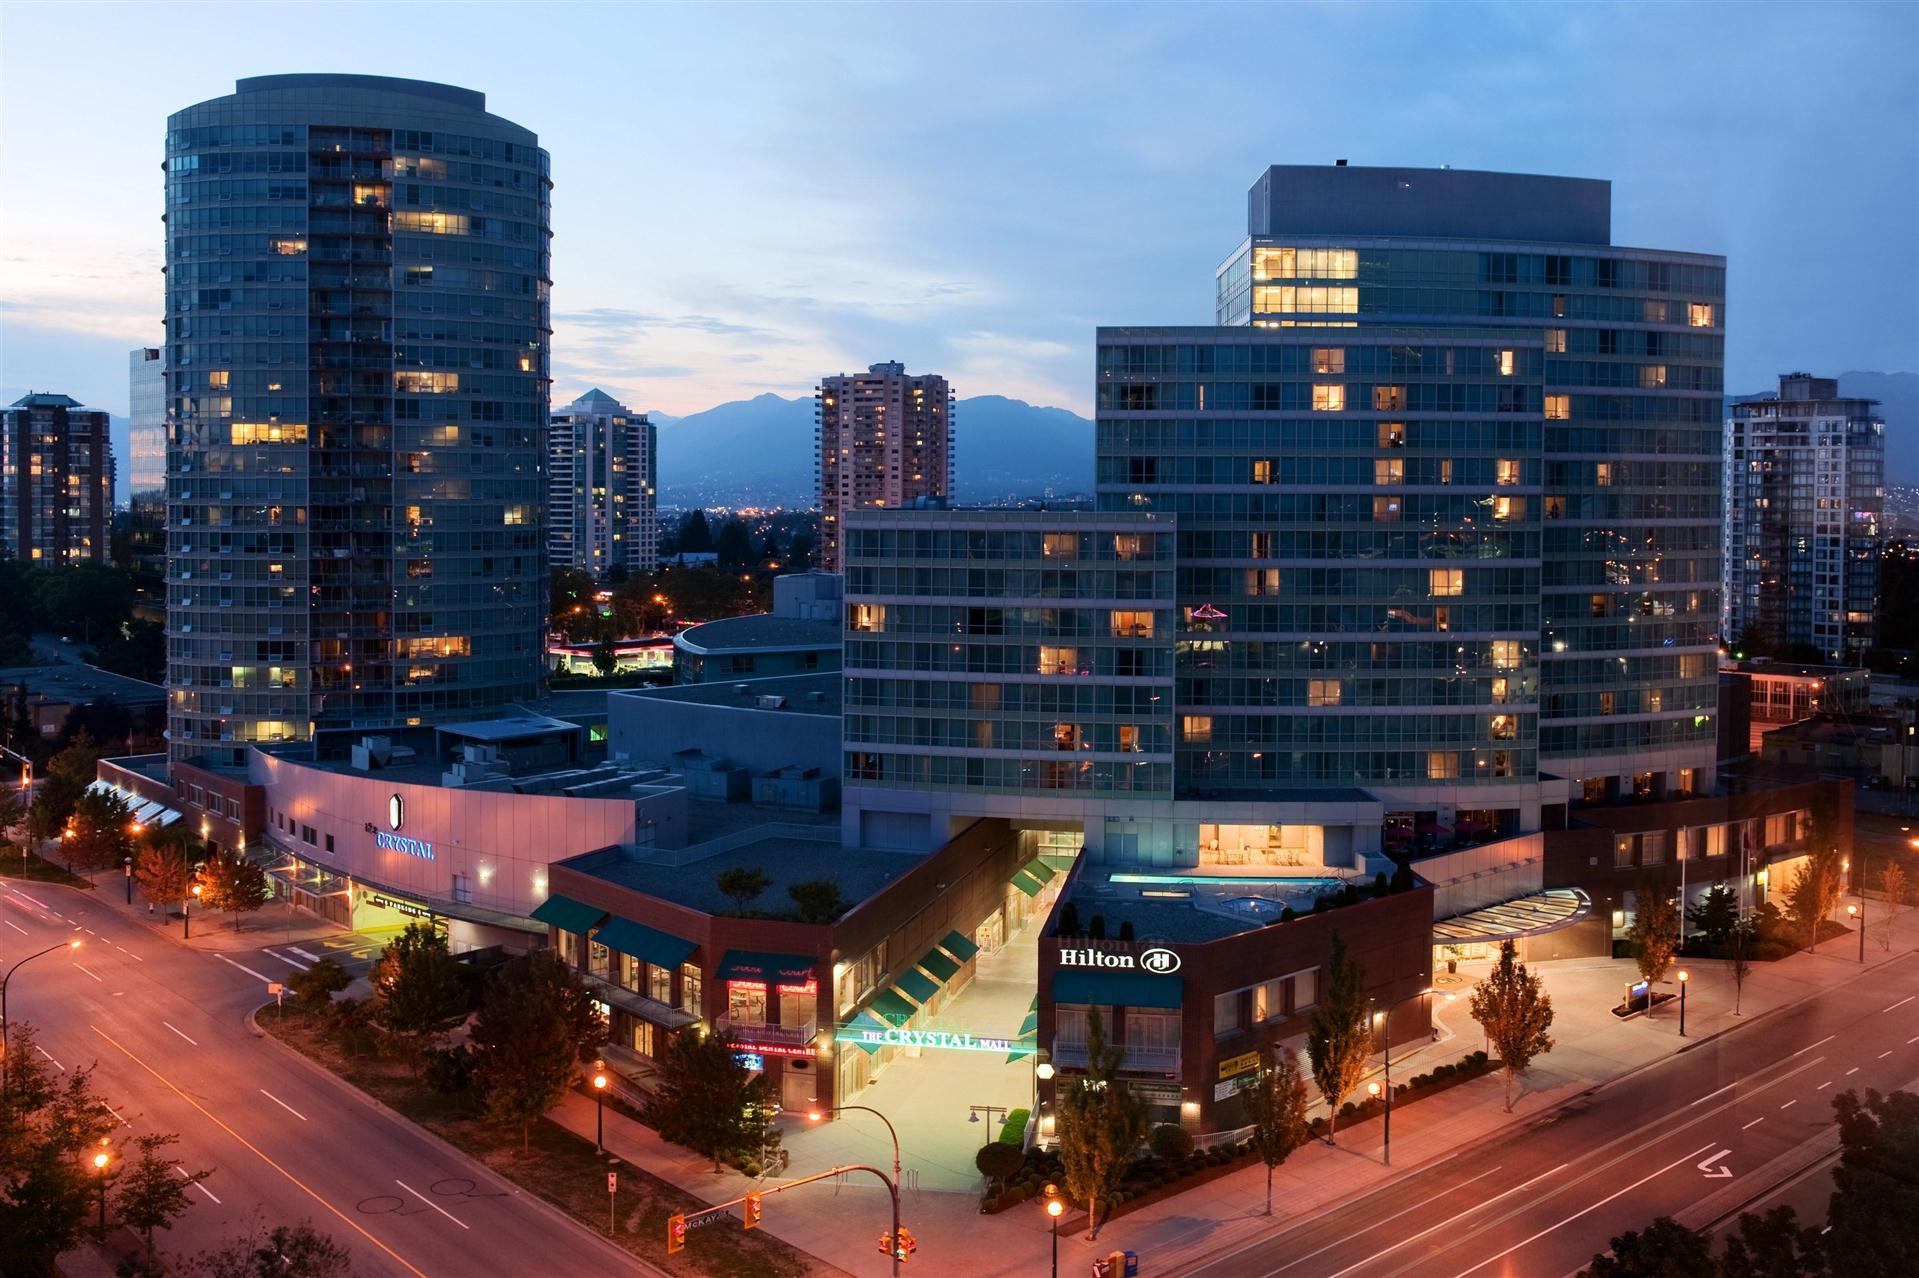 Hilton Vancouver Metrotown in Burnaby, BC